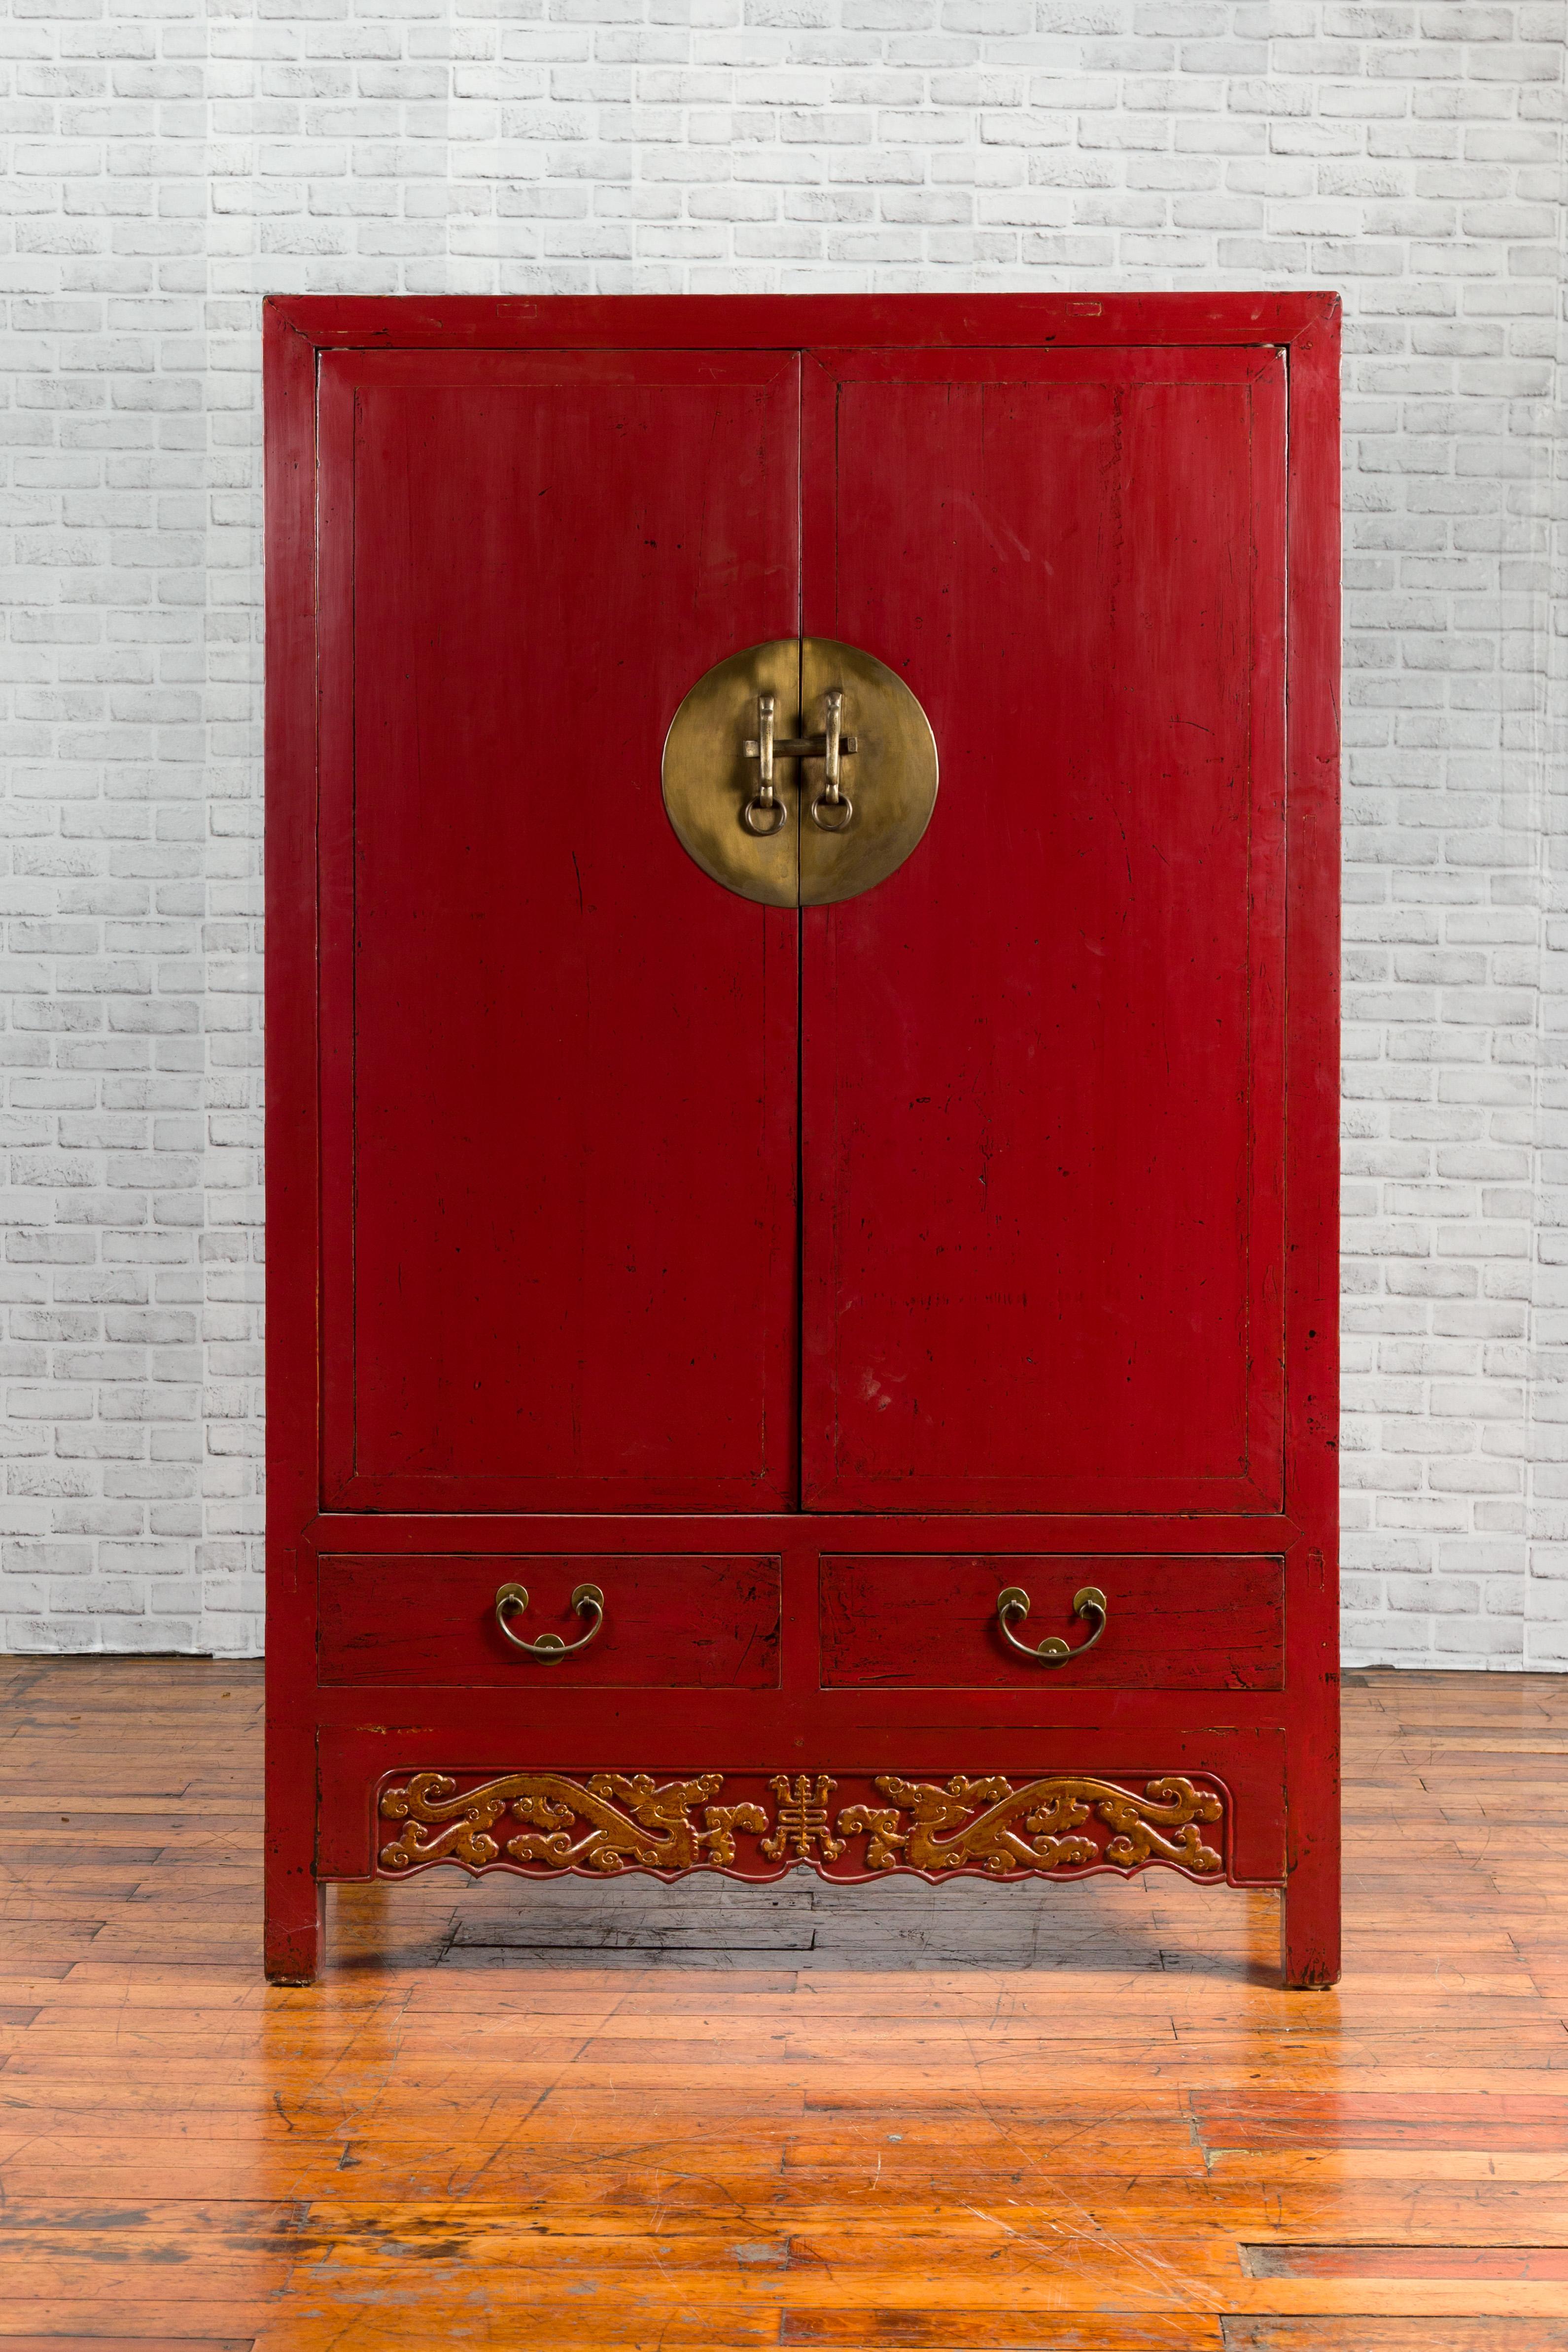 A Chinese red lacquered Qing Dynasty period cabinet from the 19th century, with round brass medallion, drawers and carved gilded apron. Created in China during the Qing Dynasty period, this red lacquered cabinet features two doors fitted with a